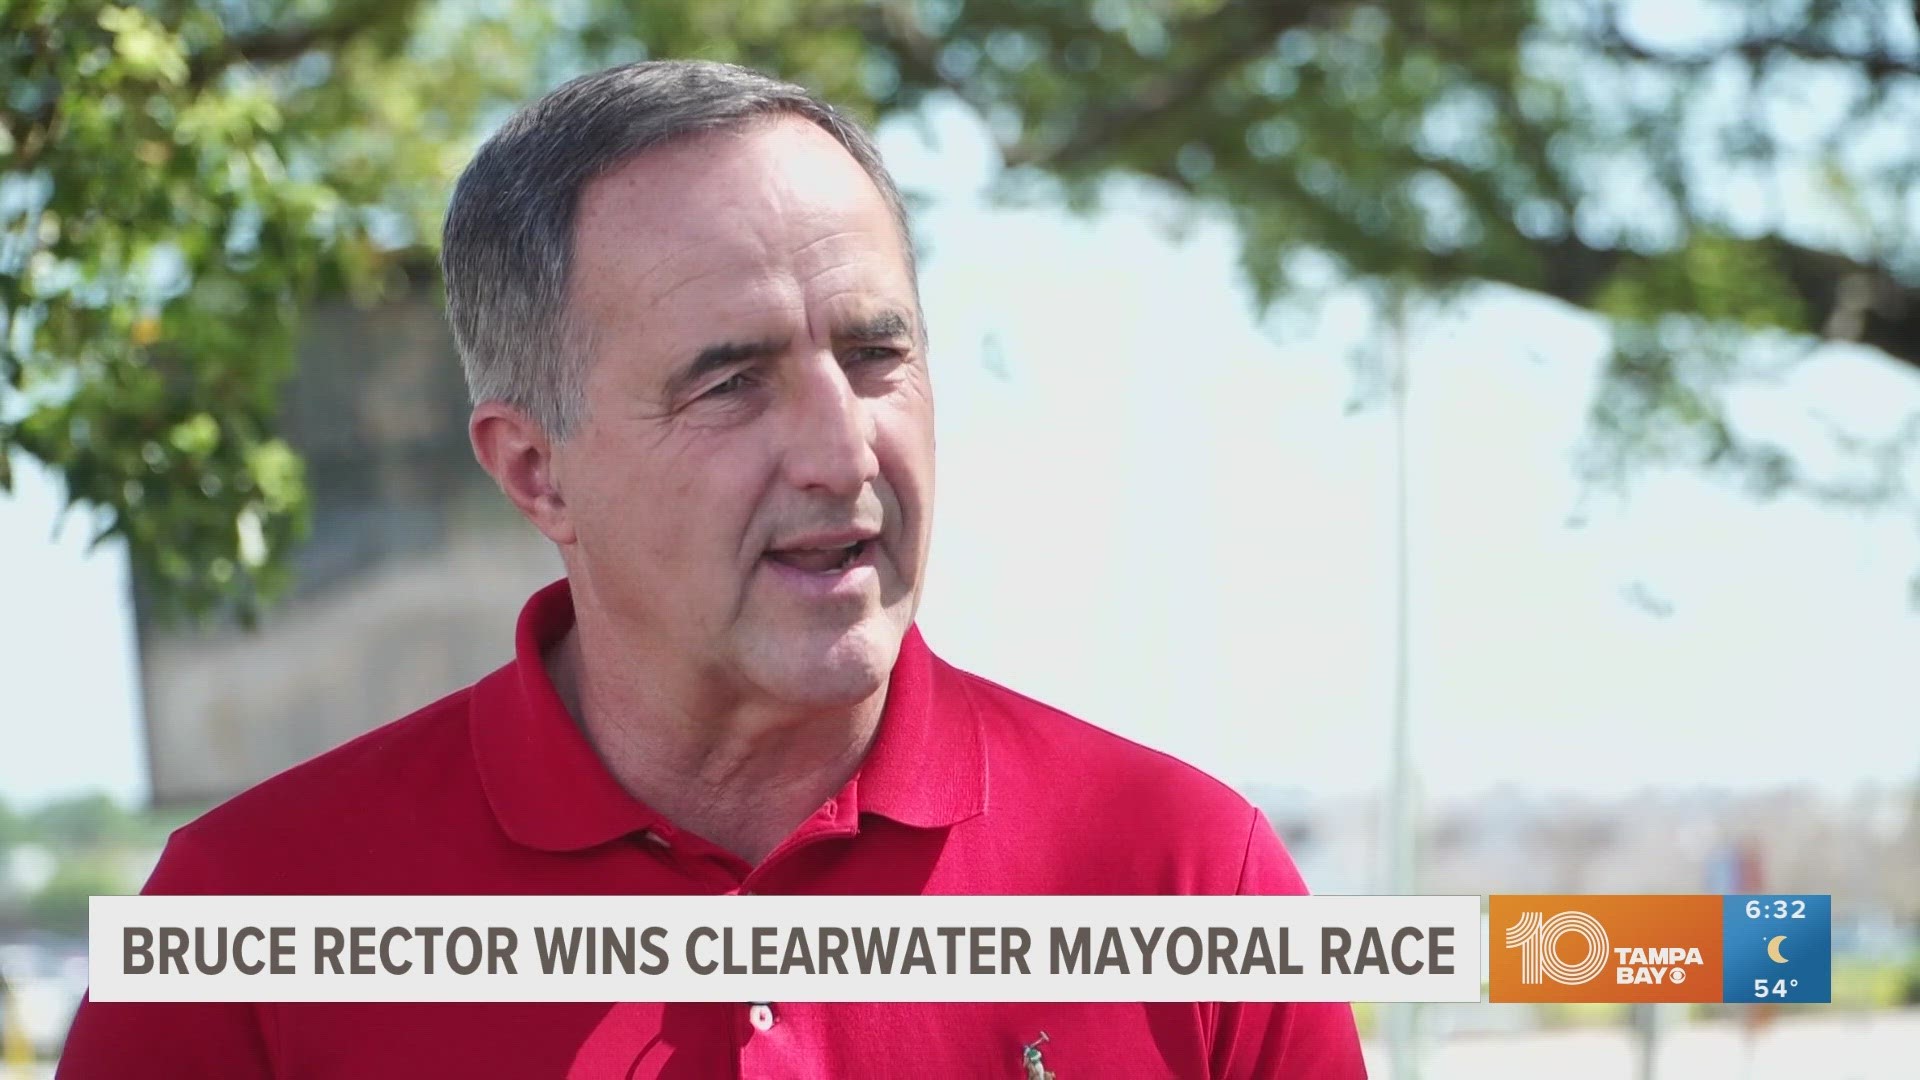 Clearwater voters also passed a change to the city charter to replace single winner-take-all elections with a runoff system.